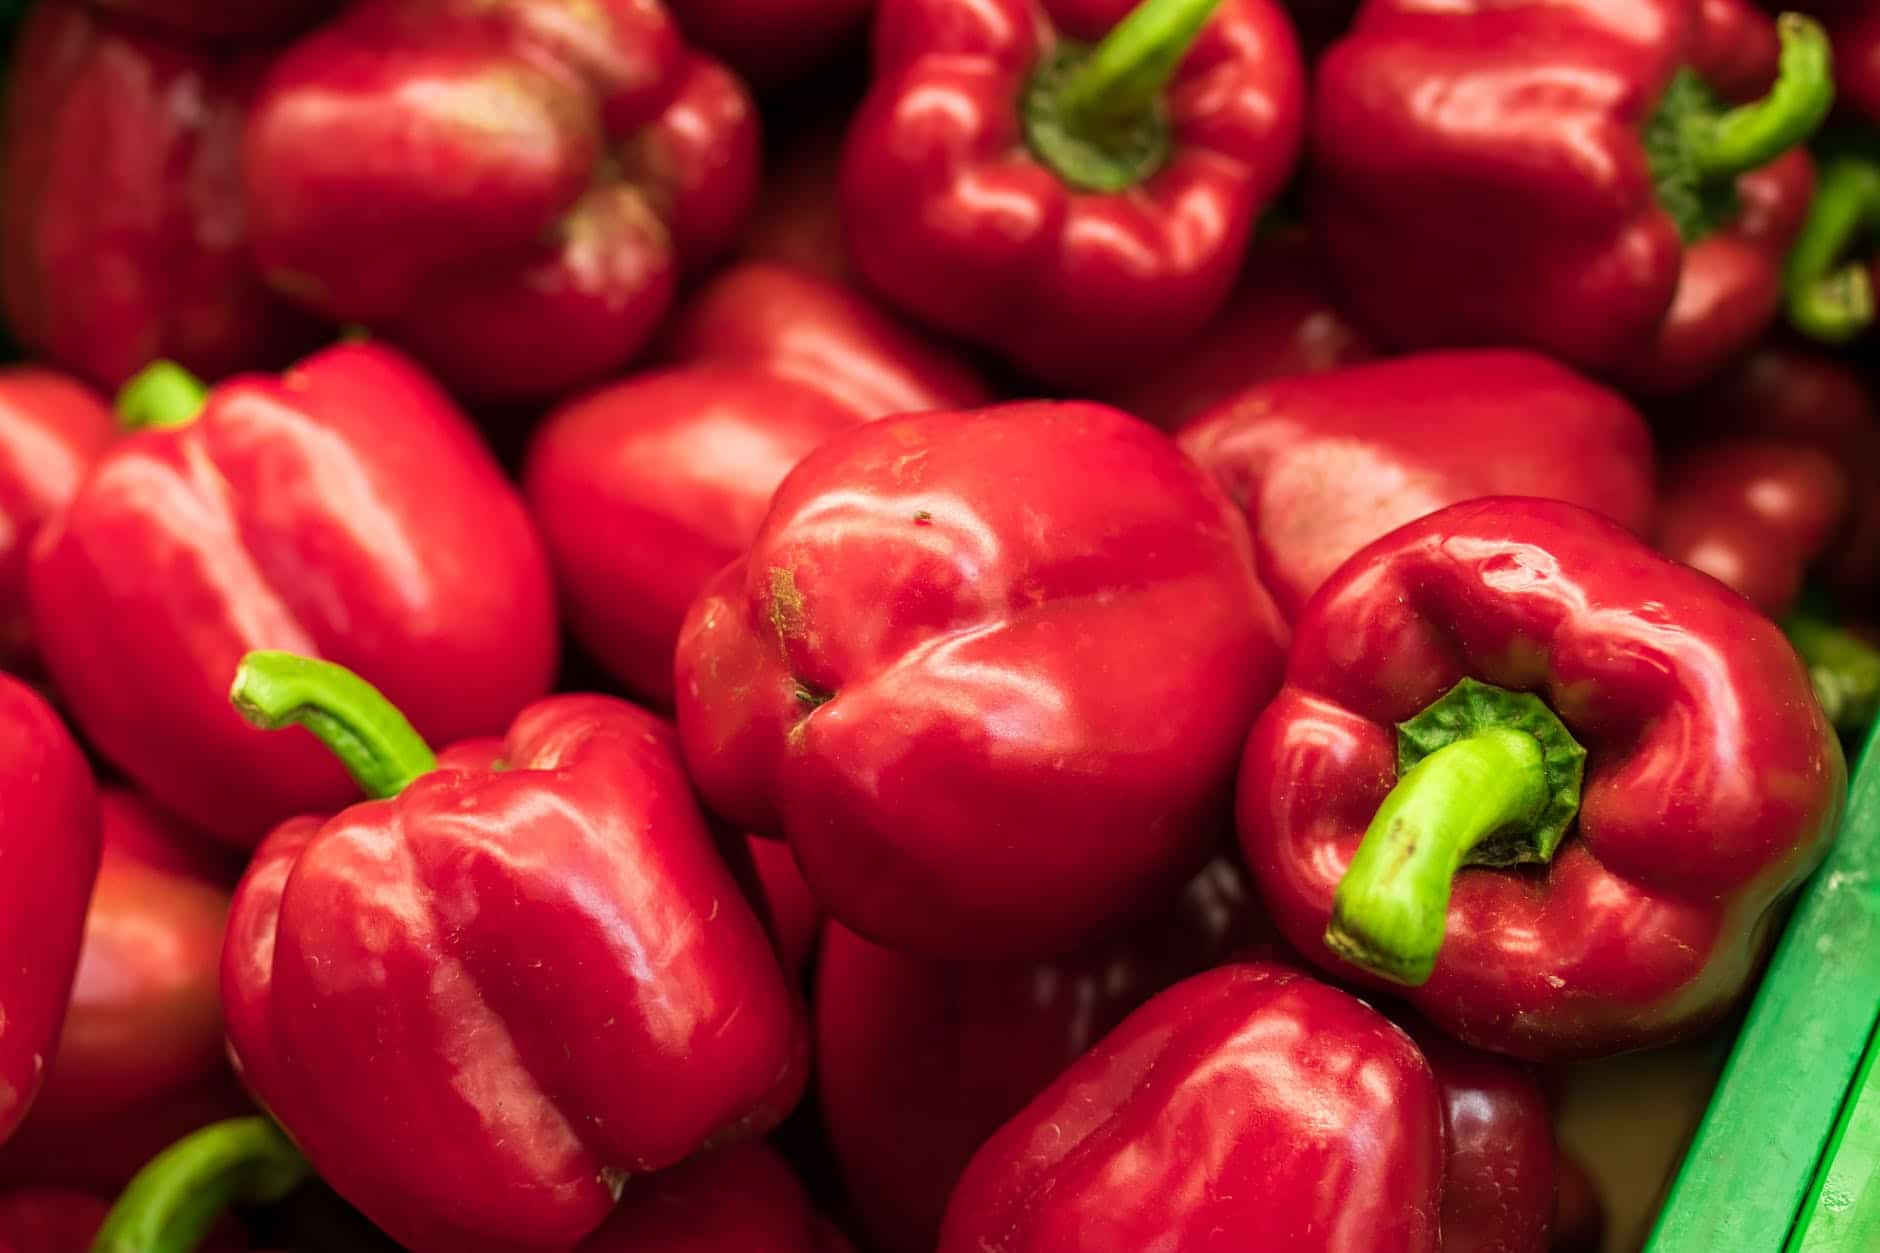 How To Store Peppers To Last Longer